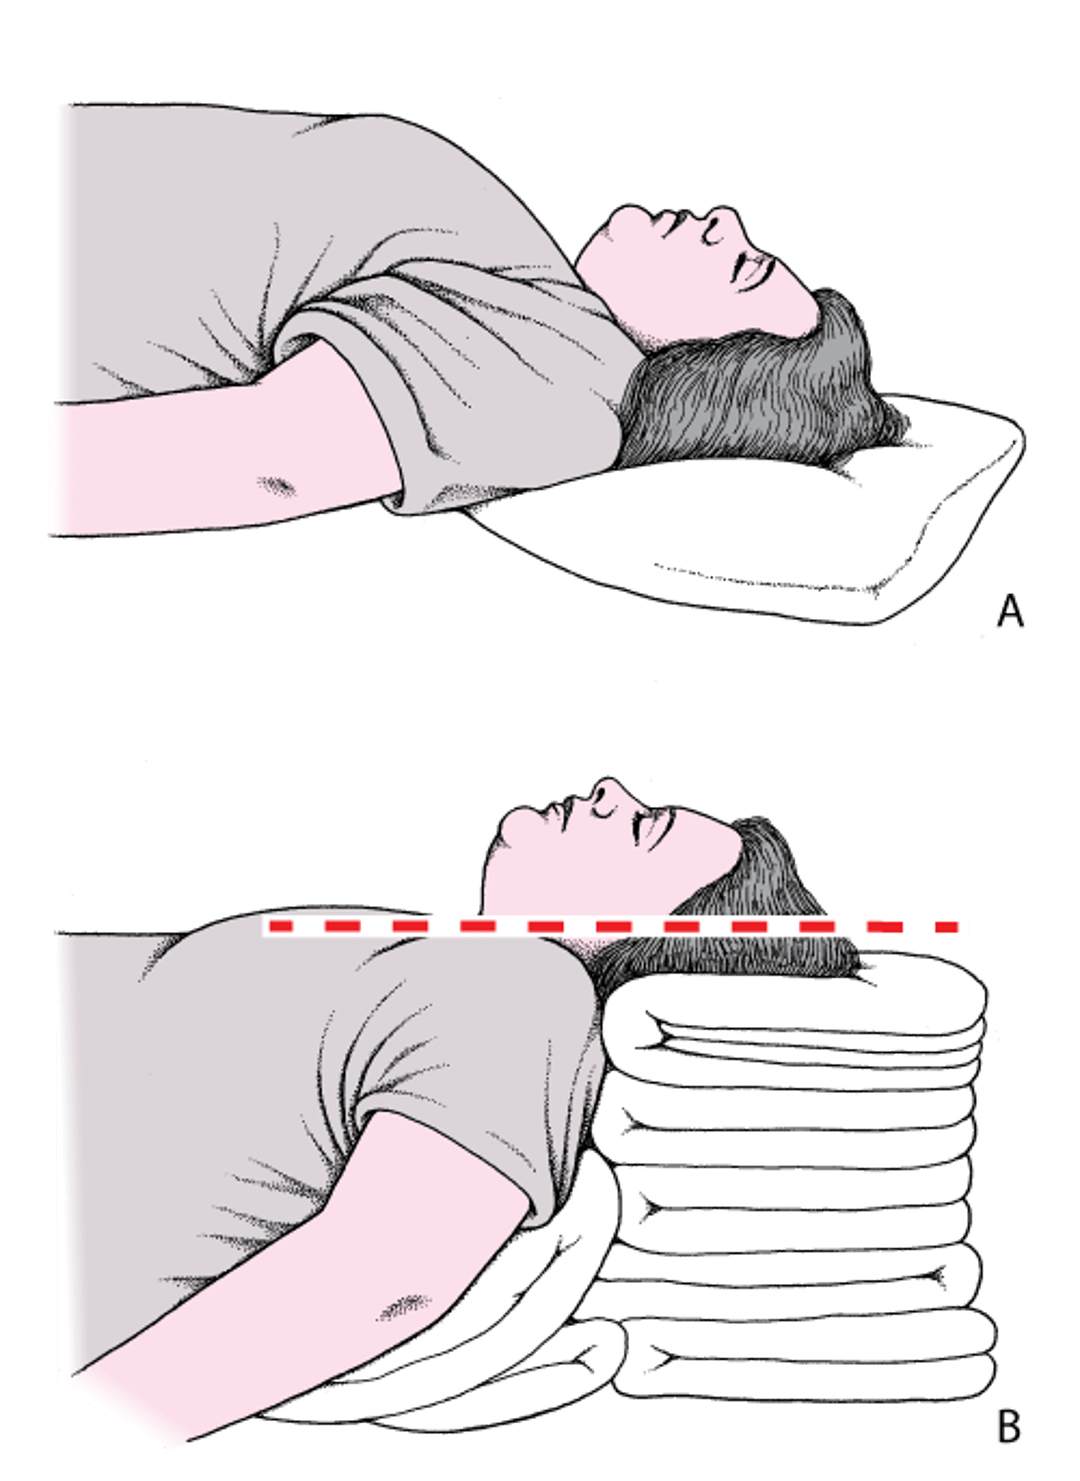 Head and neck positioning to open the airway